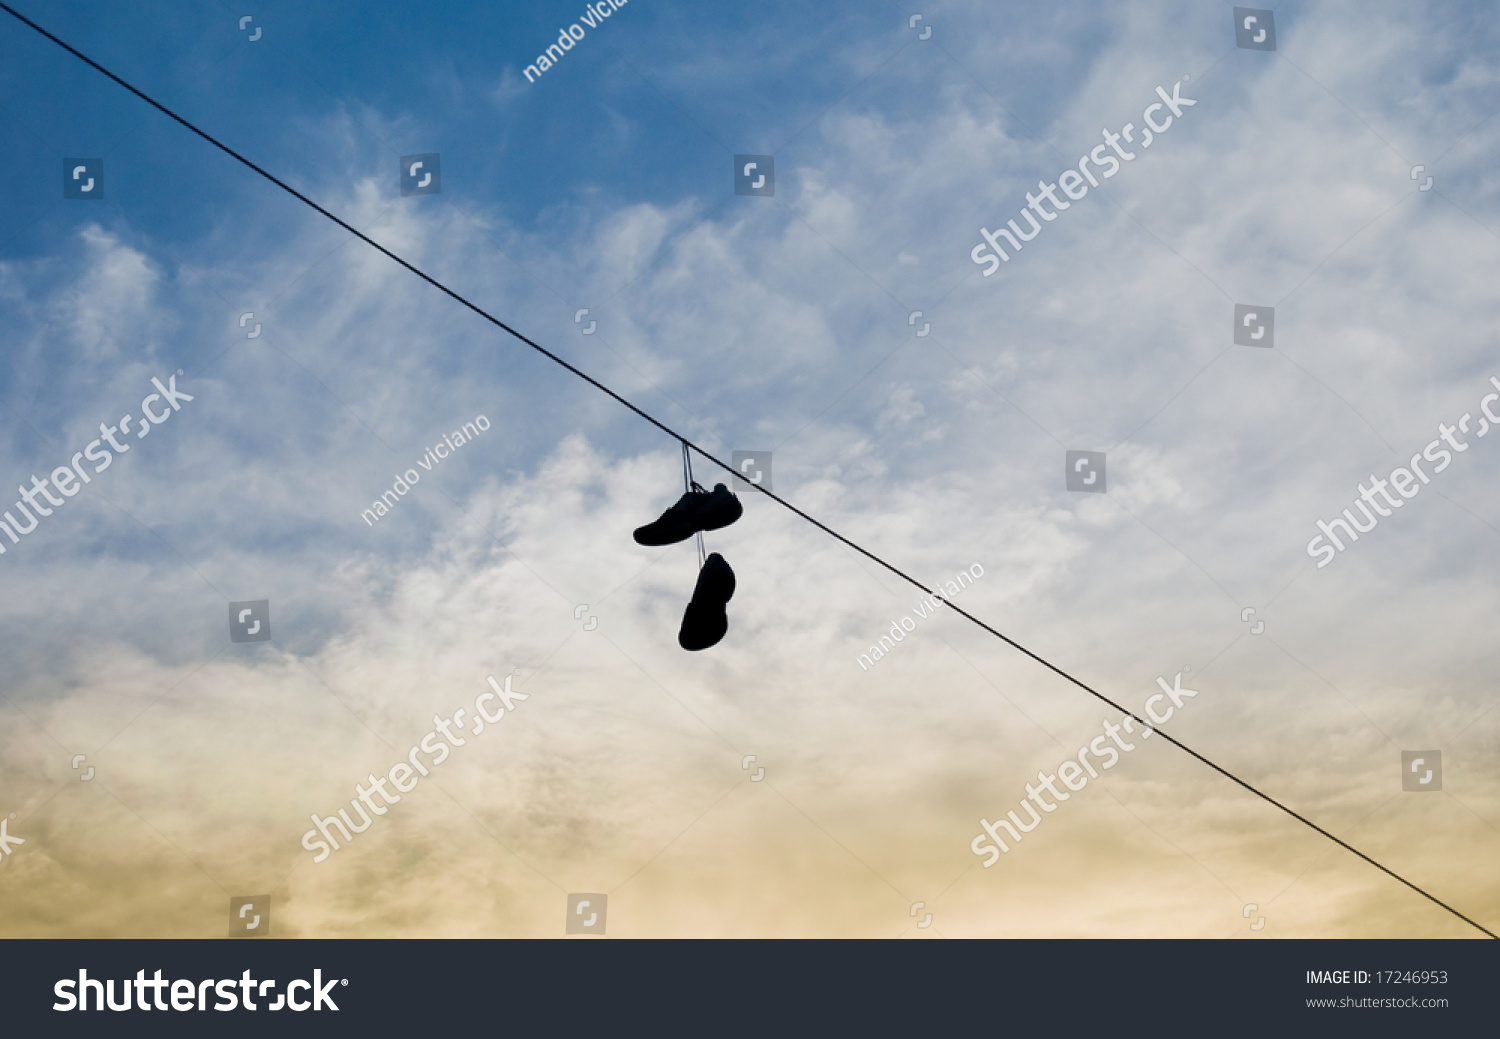 Shoes Hanging On A Power Line Stock Photo 17246953 : Shutterstock